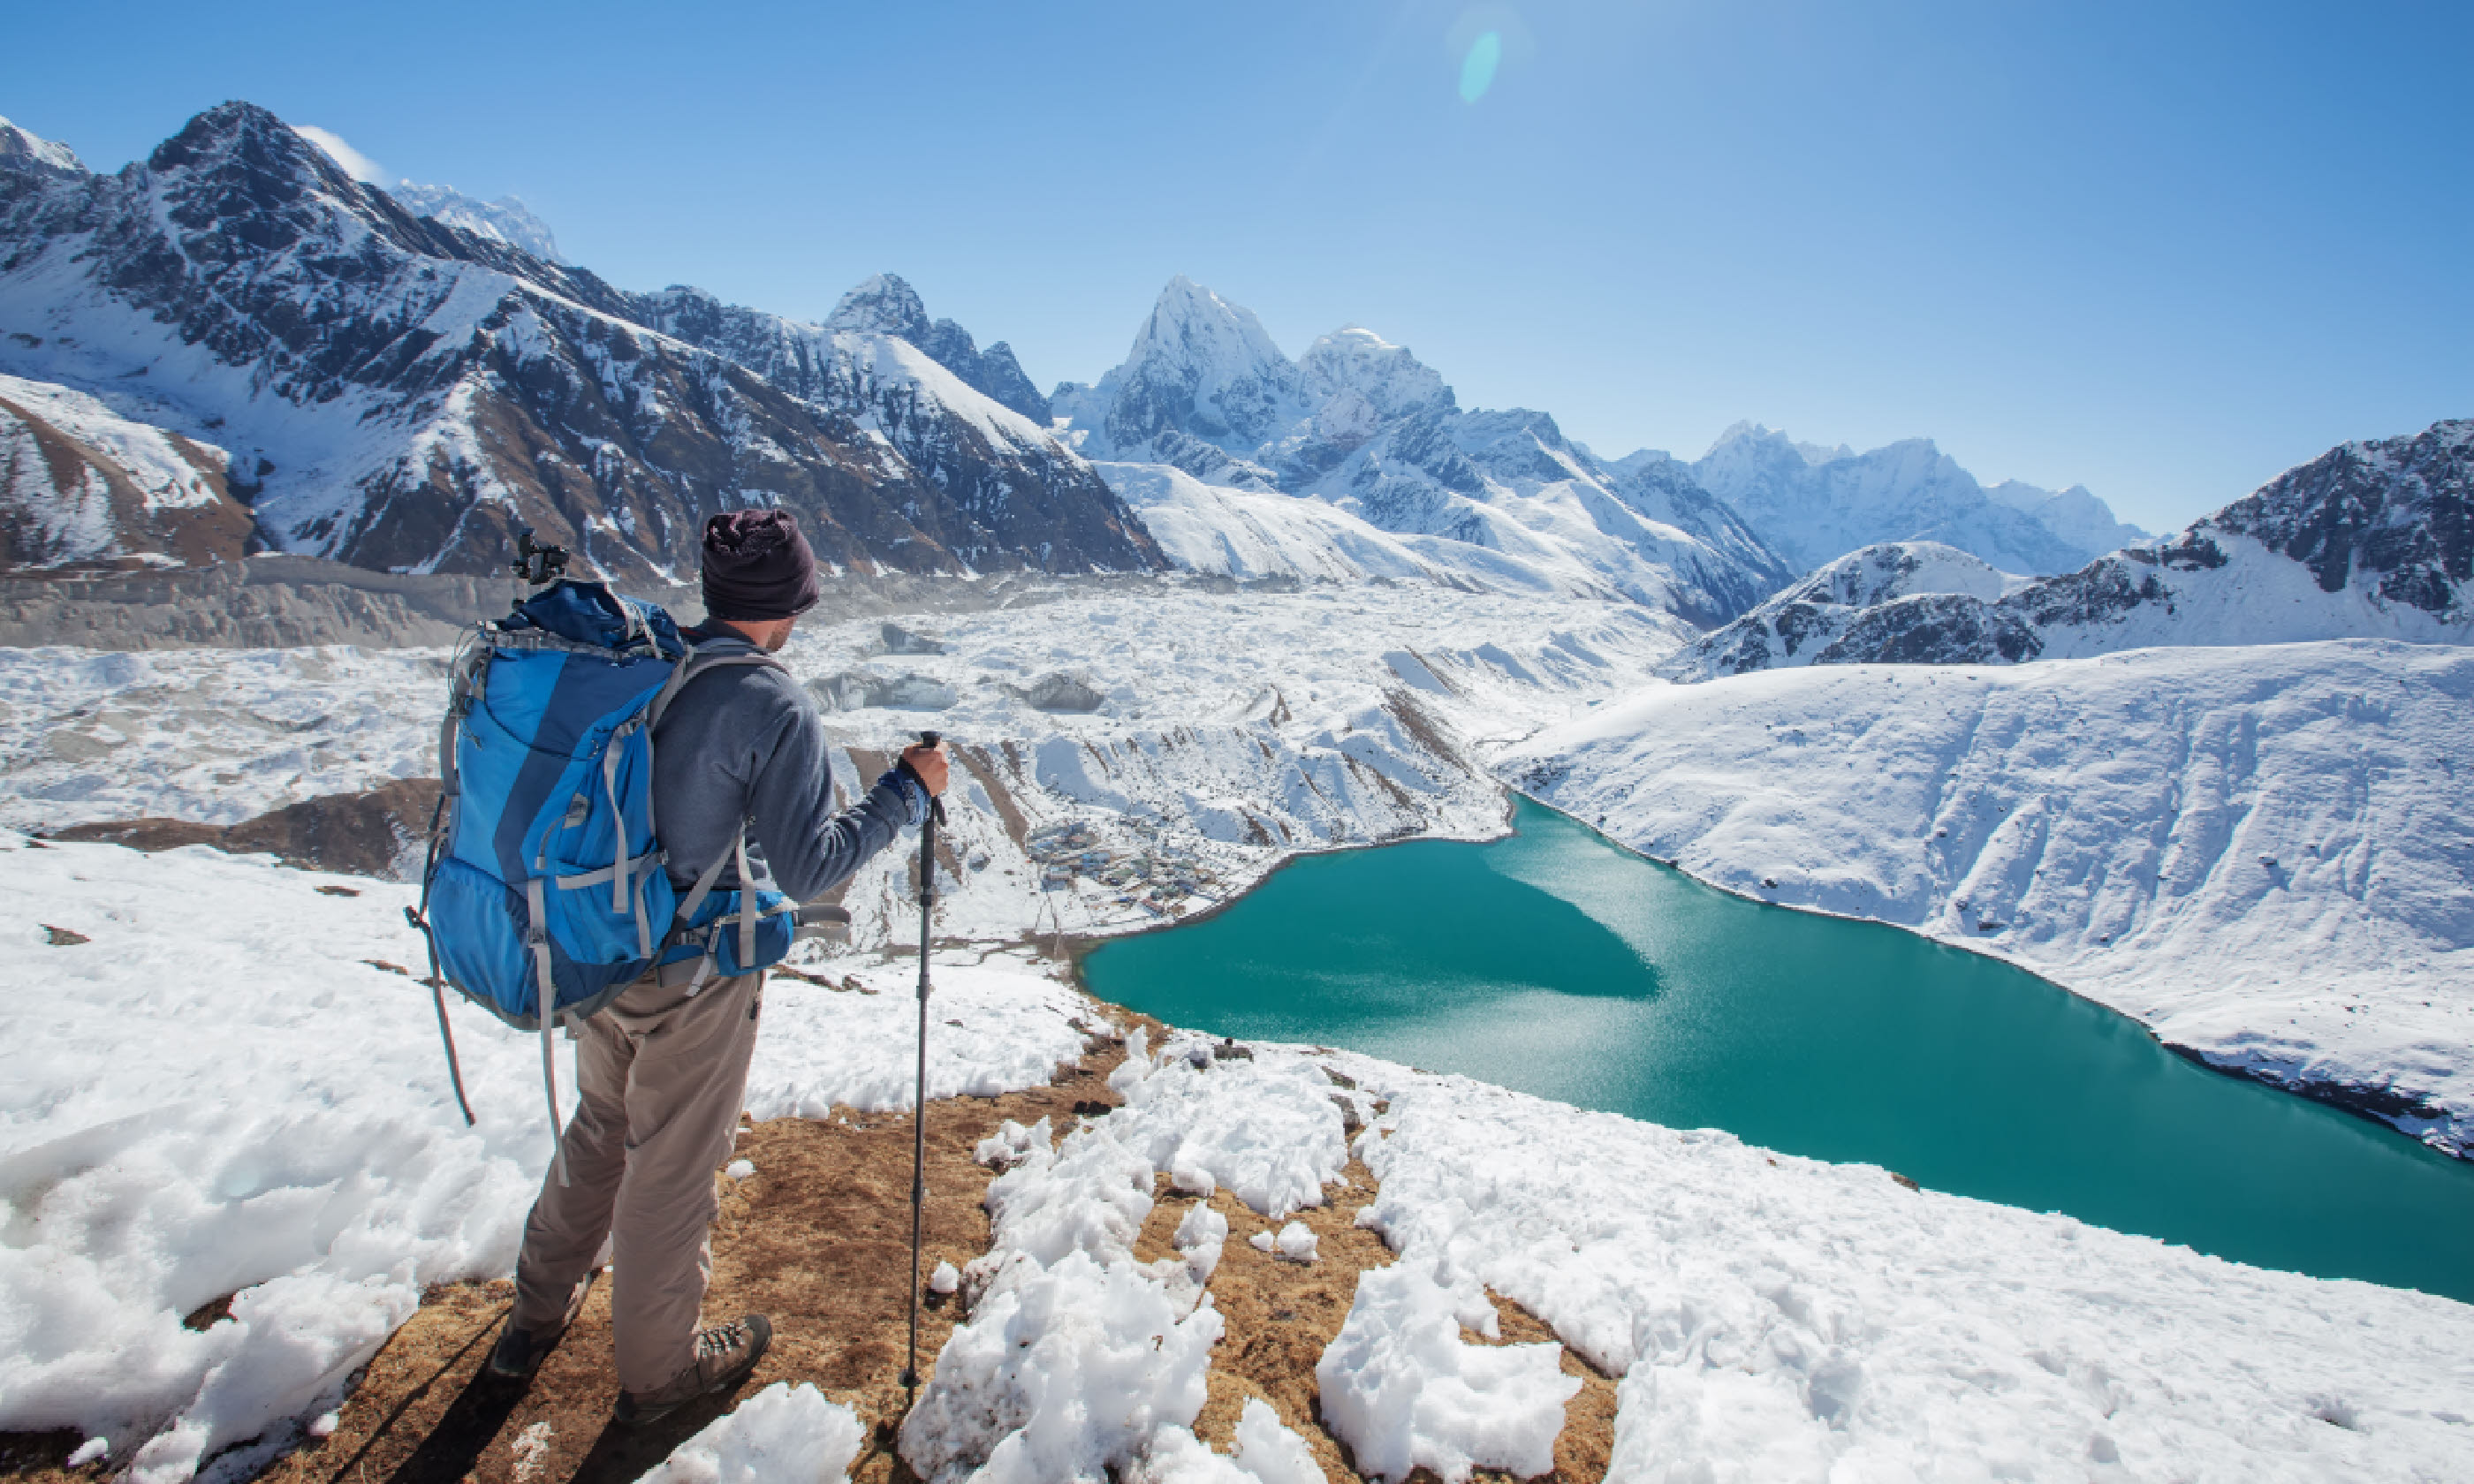 Hiker in the Himalayas (Shutterstock)